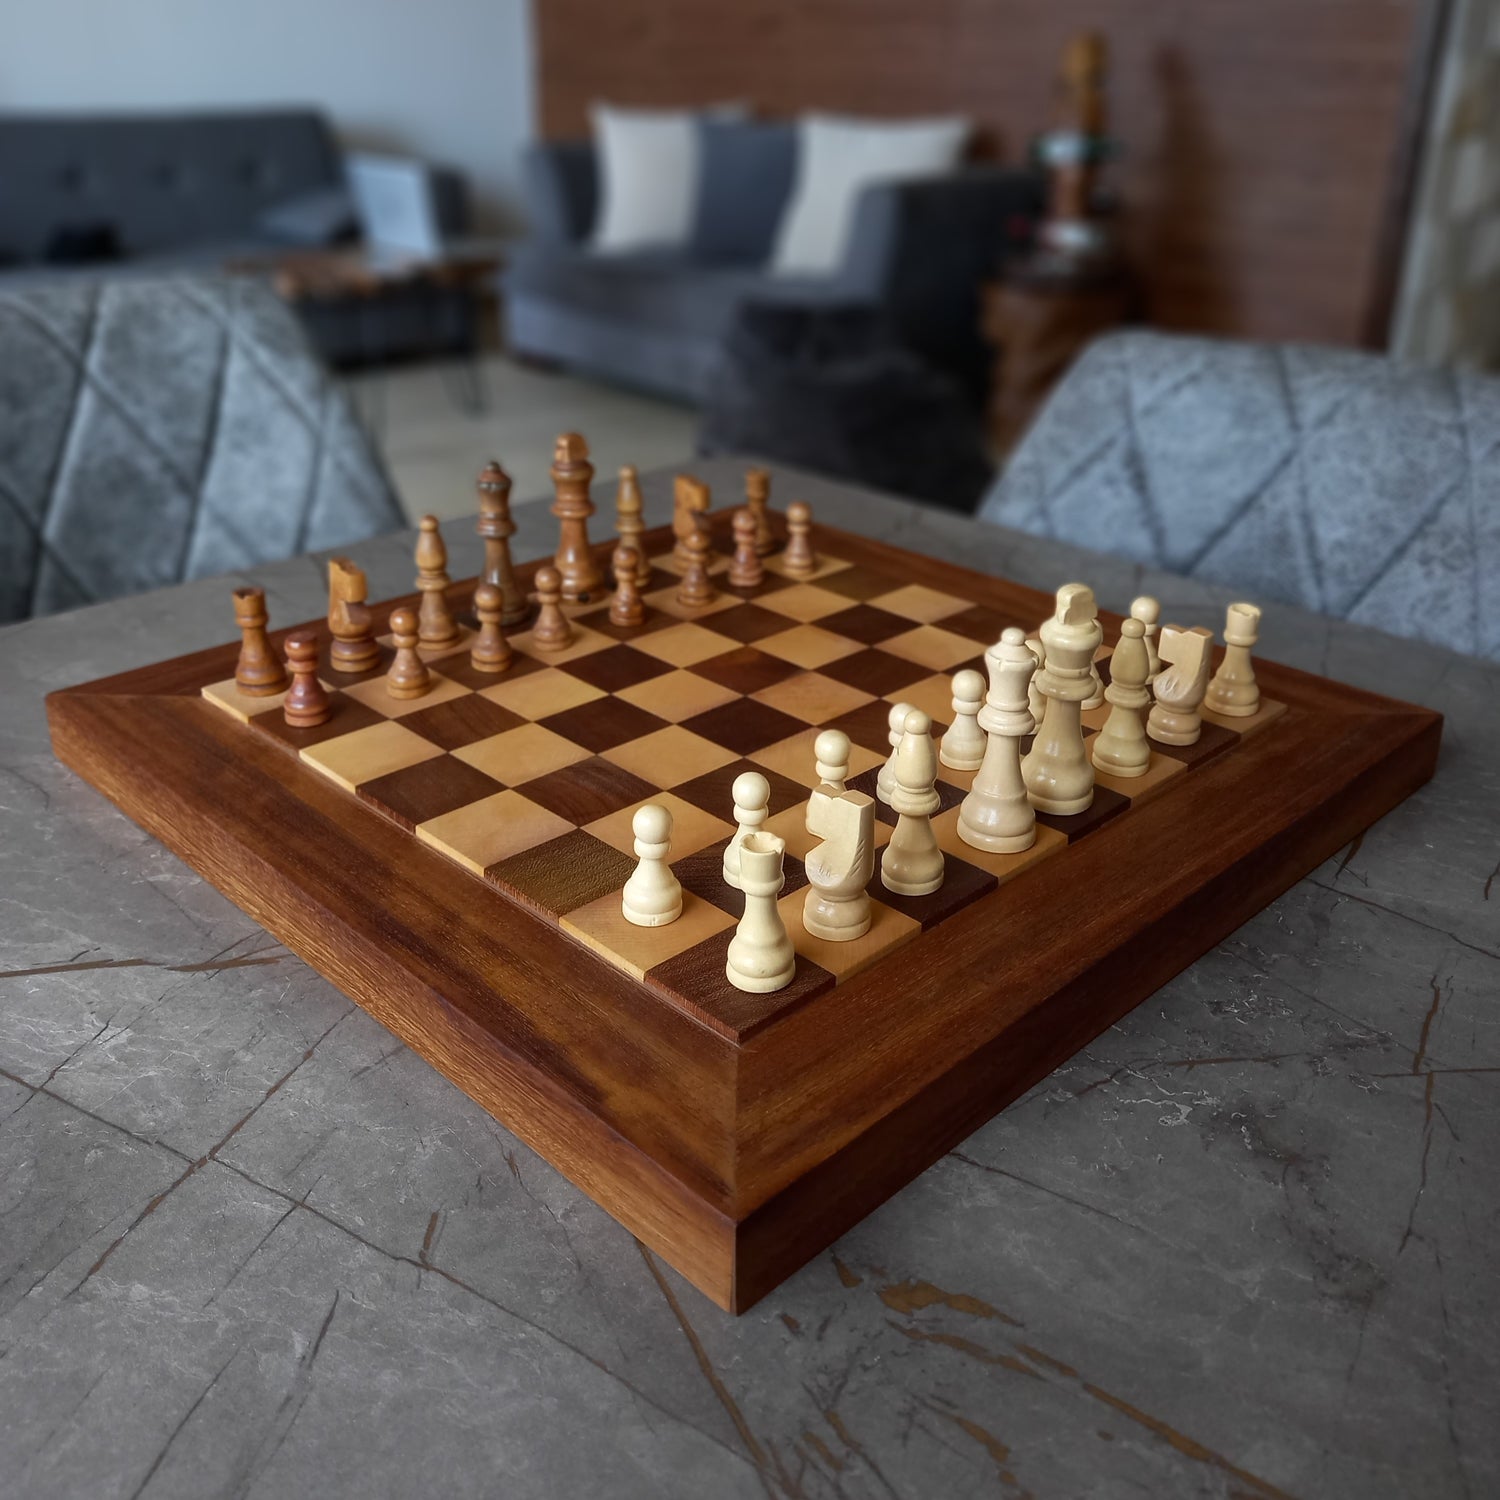 Luxurious Chess board / chess pieces / chess clubs / handmade